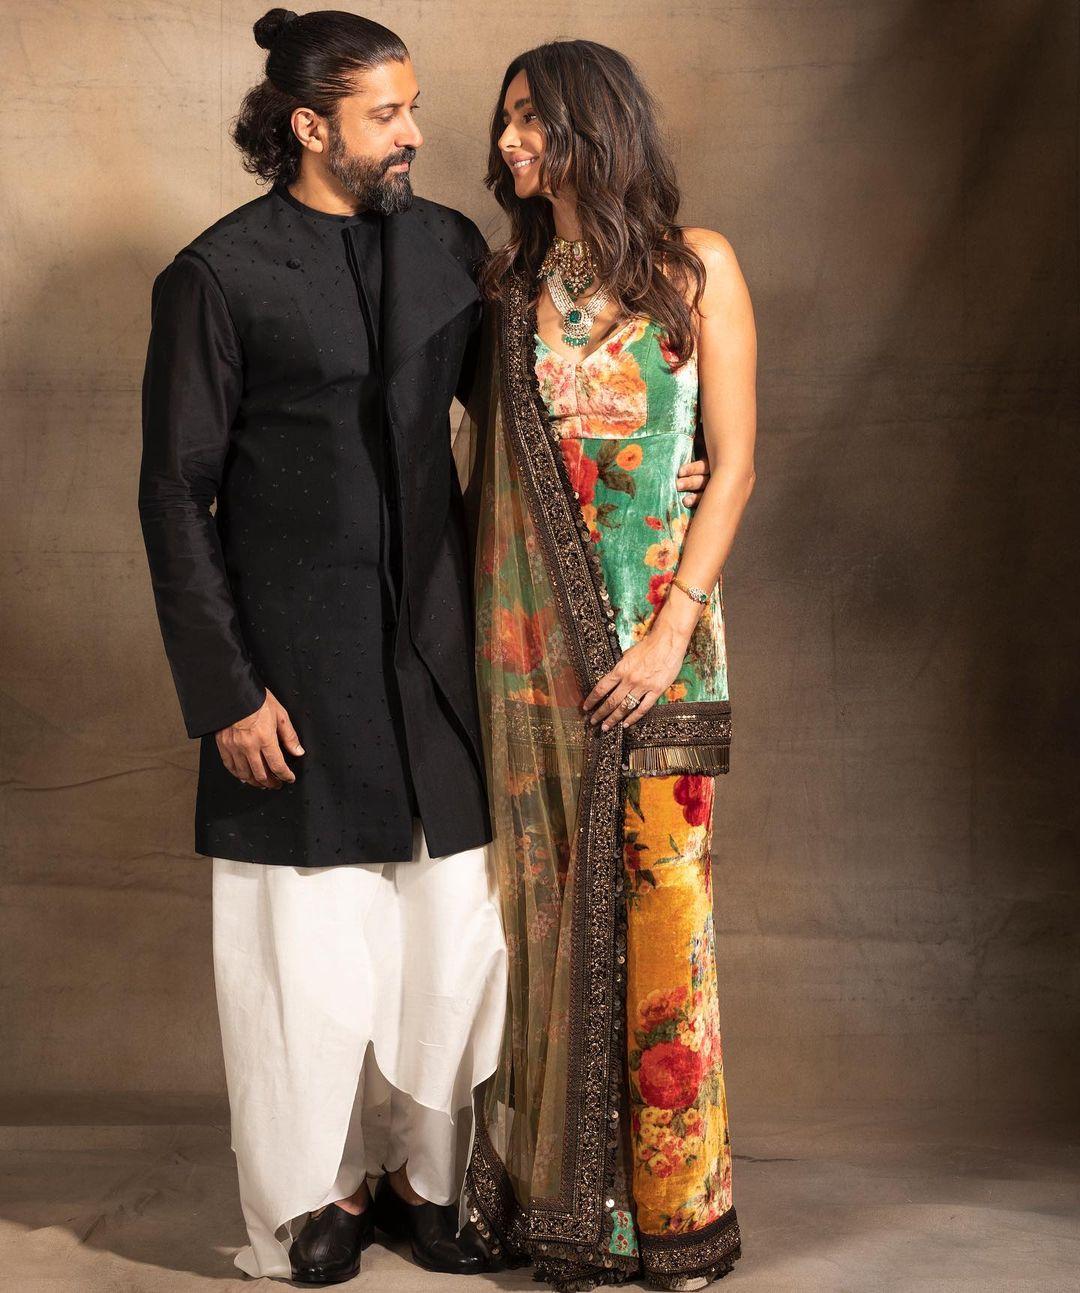 In one look, Shibani and Farhan opted for traditional wear, offering valuable styling cues for friends' weddings